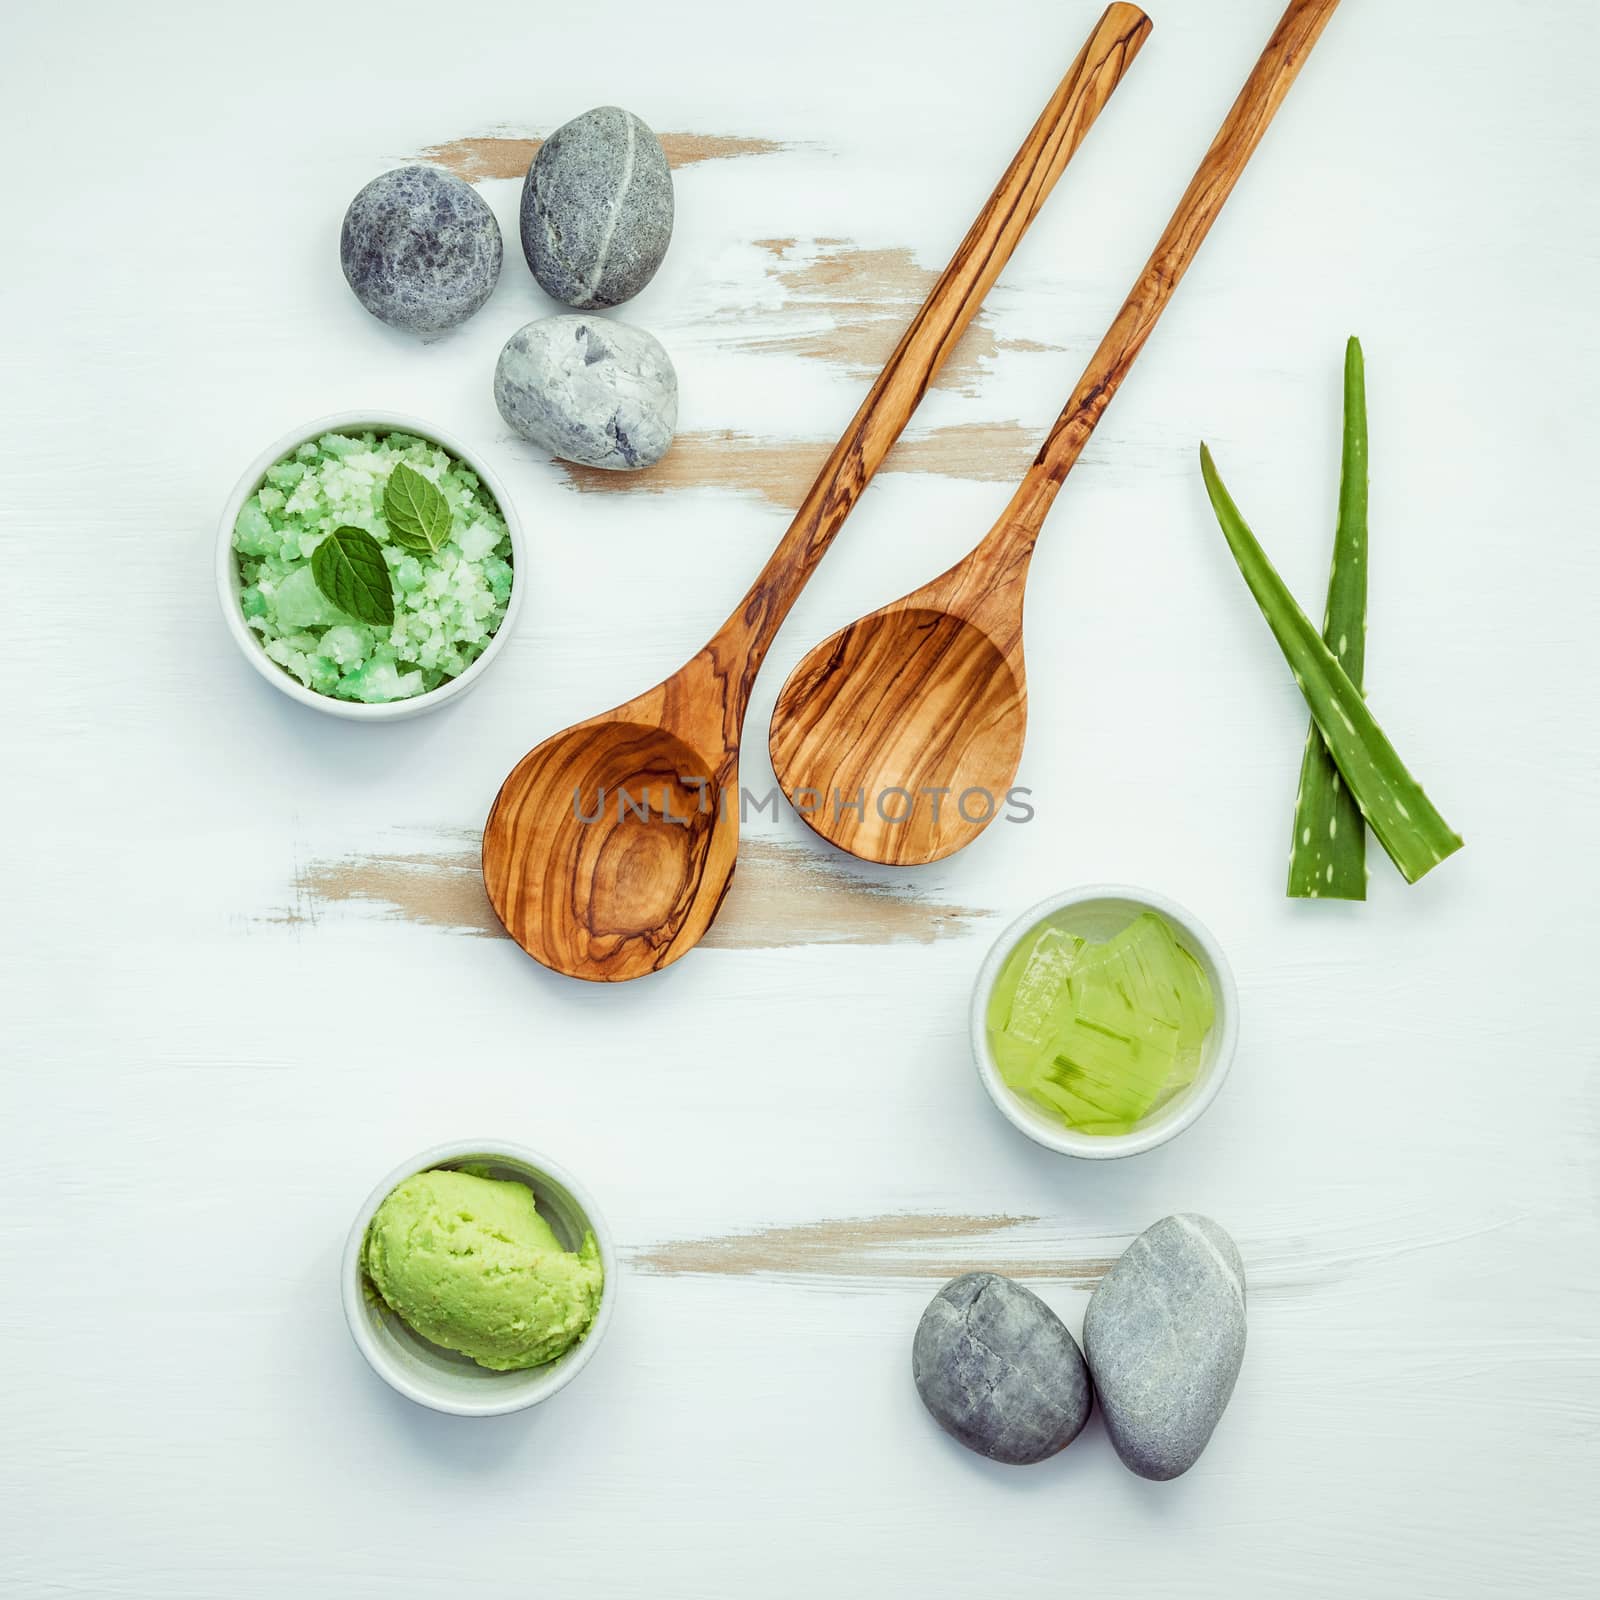 Homemade skin care and body scrubs with green natural ingredients aloe vera  ,aromatic salt ,avocado scrub and spa stone set up on white shabby wooden background. Zen spa and oriental spa theme.